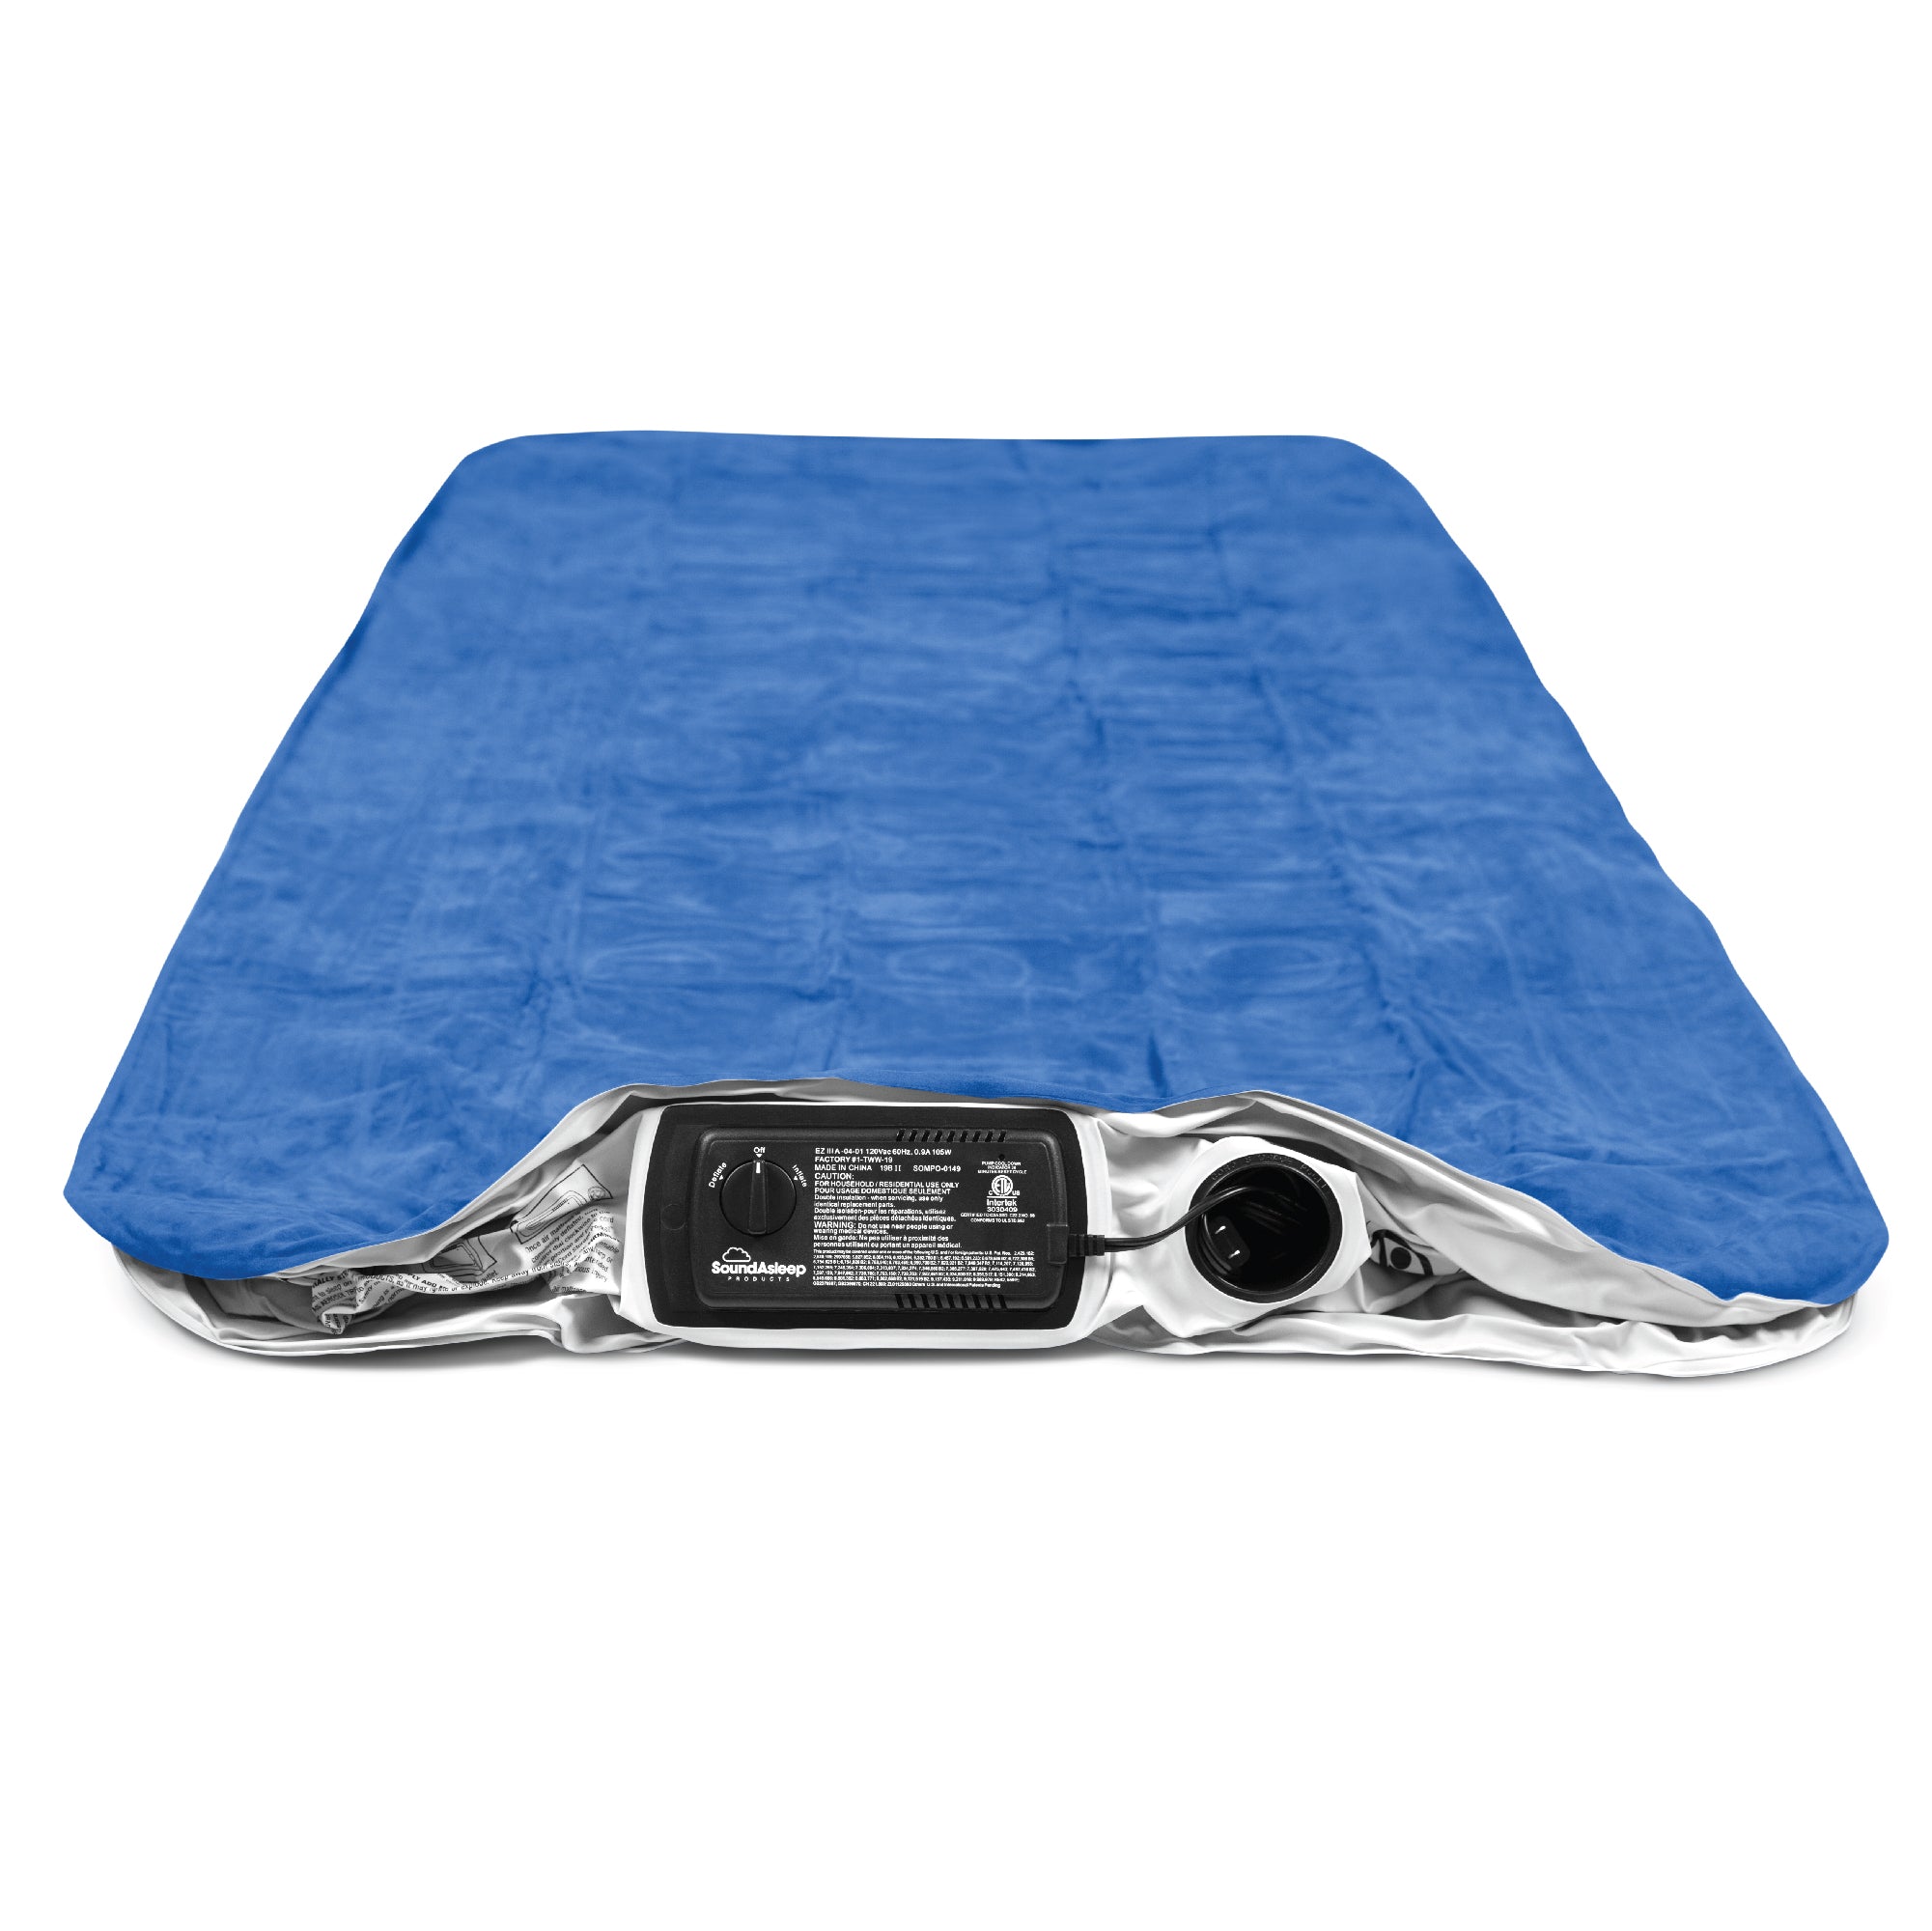 SoundAsleep Dream Series Air Mattress with ComfortCoil Technology & In –  Sound Asleep Products